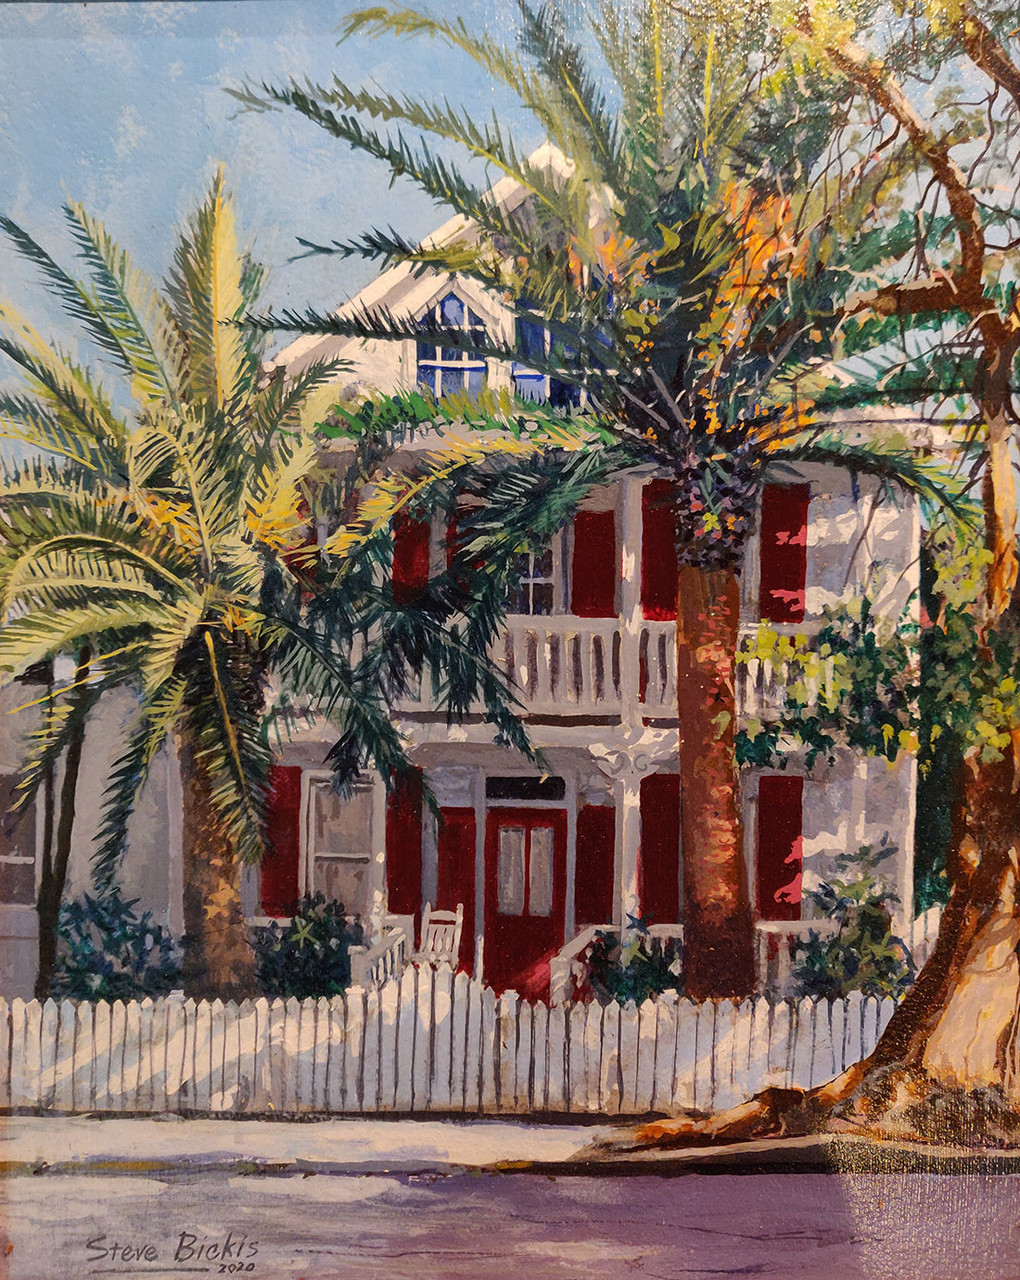 Bickis started his Key West tenure as a sign painter before briefly moving north. Called back by the unique lighting of the island, he began his second life here, exploring the push-pull of shadow and sunlight.